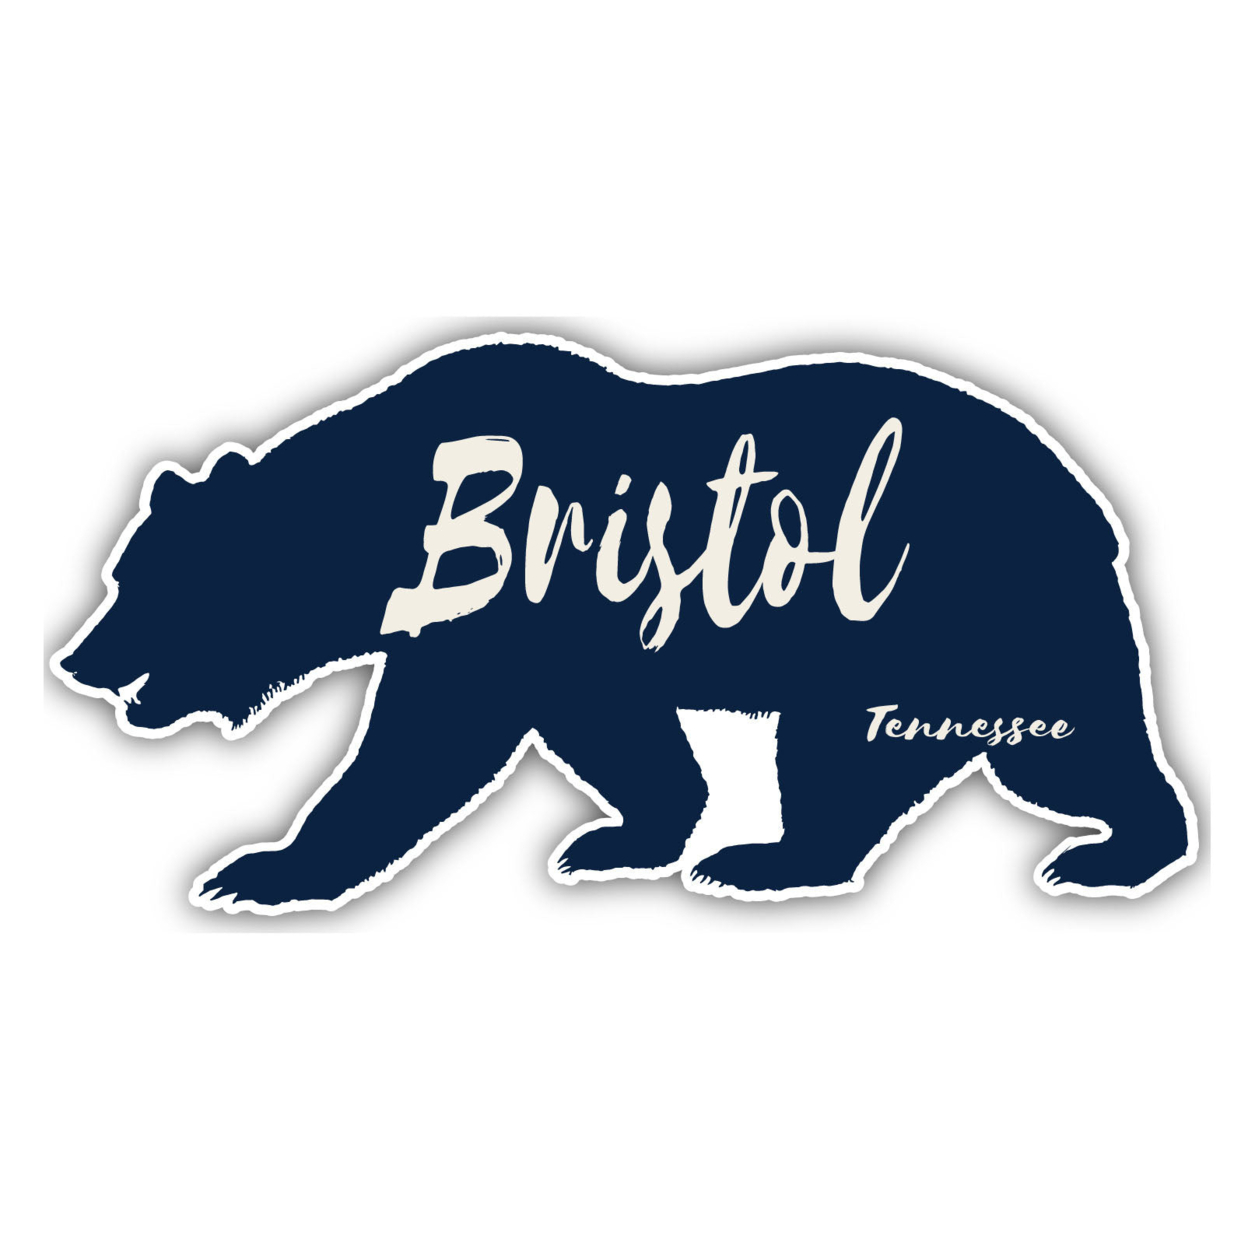 Bristol Tennessee Souvenir Decorative Stickers (Choose Theme And Size) - 4-Pack, 2-Inch, Adventures Awaits